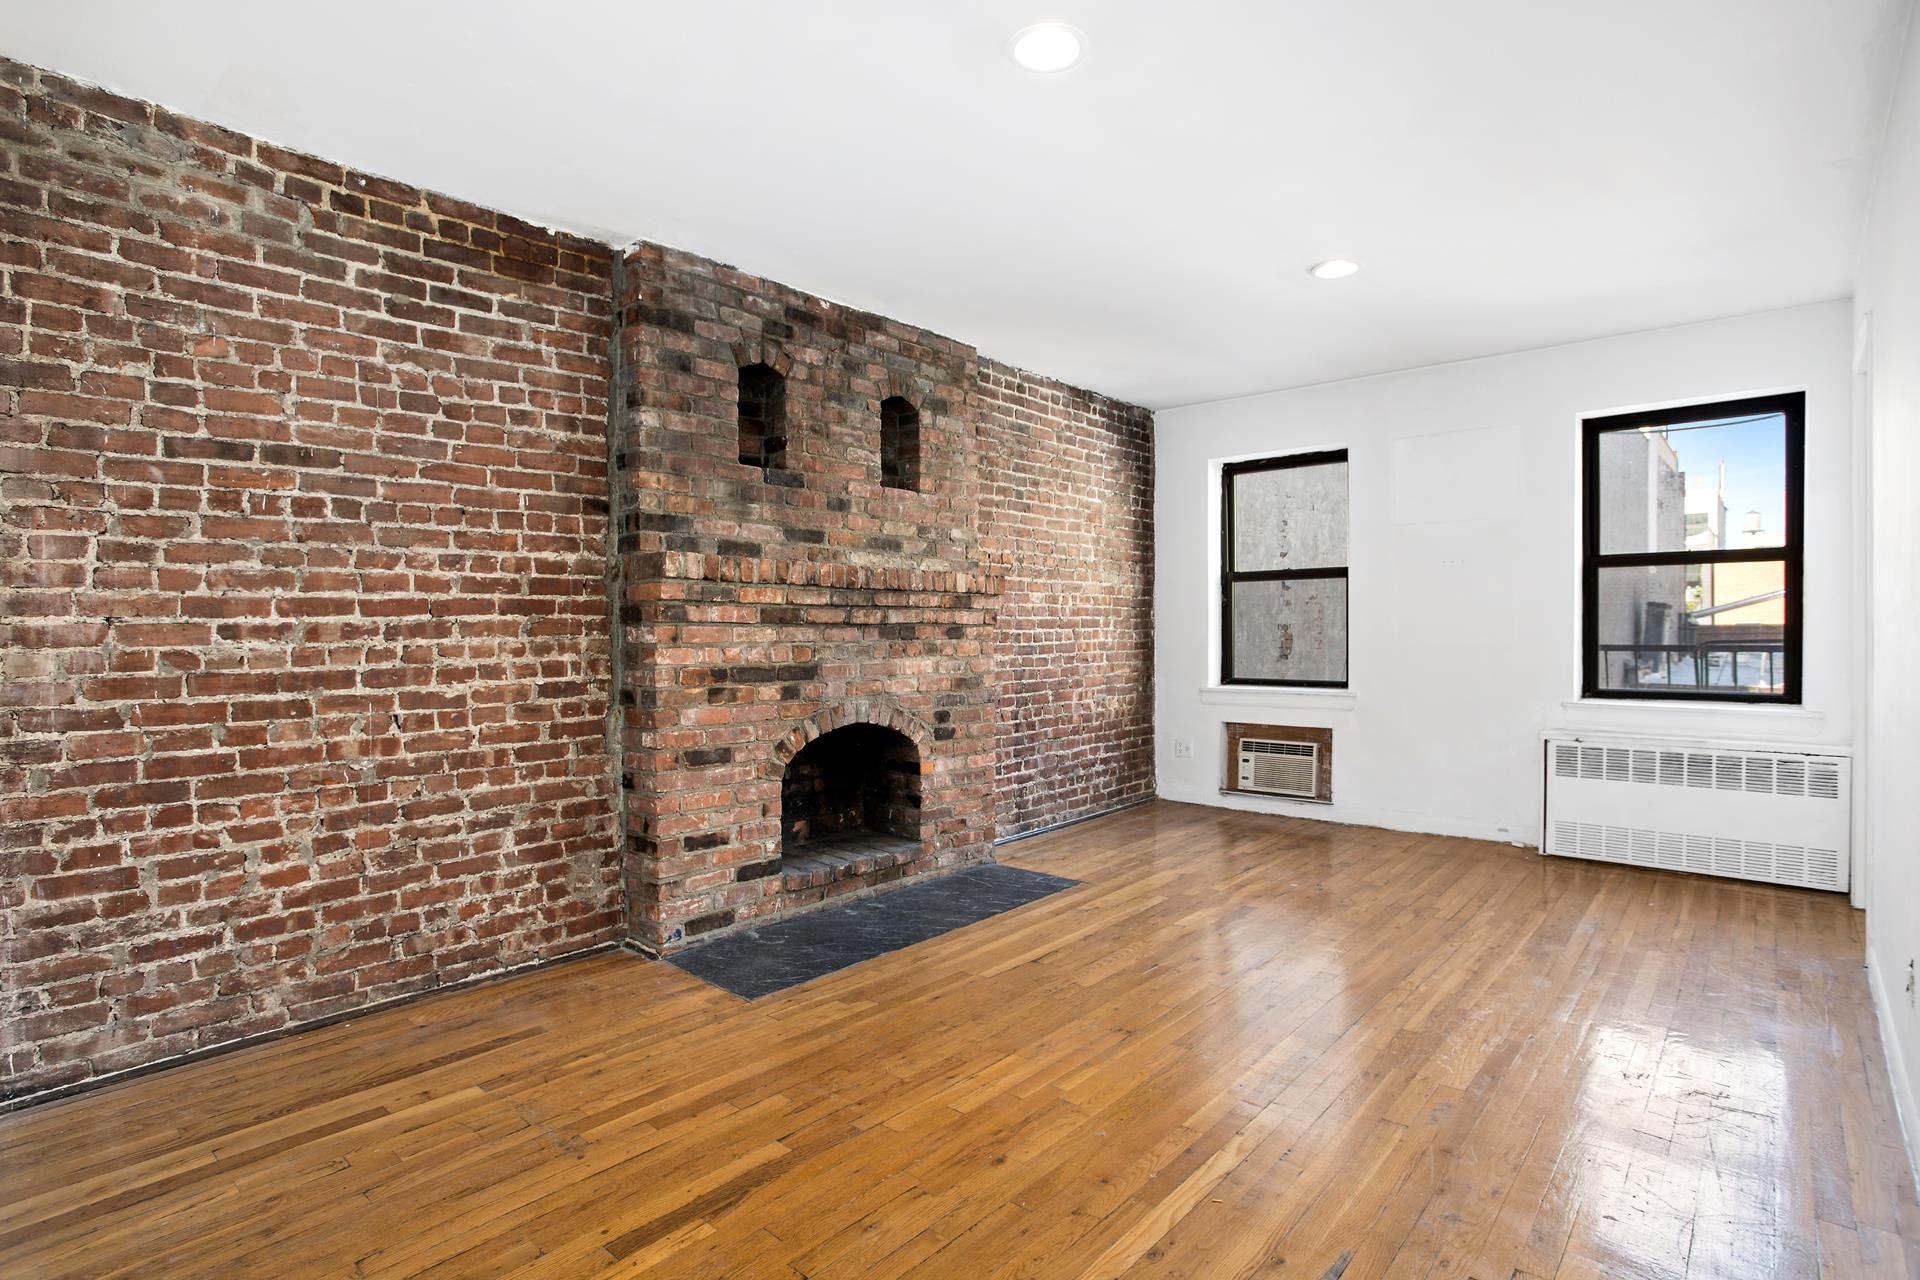 a view of empty room with a fireplace and wooden floor